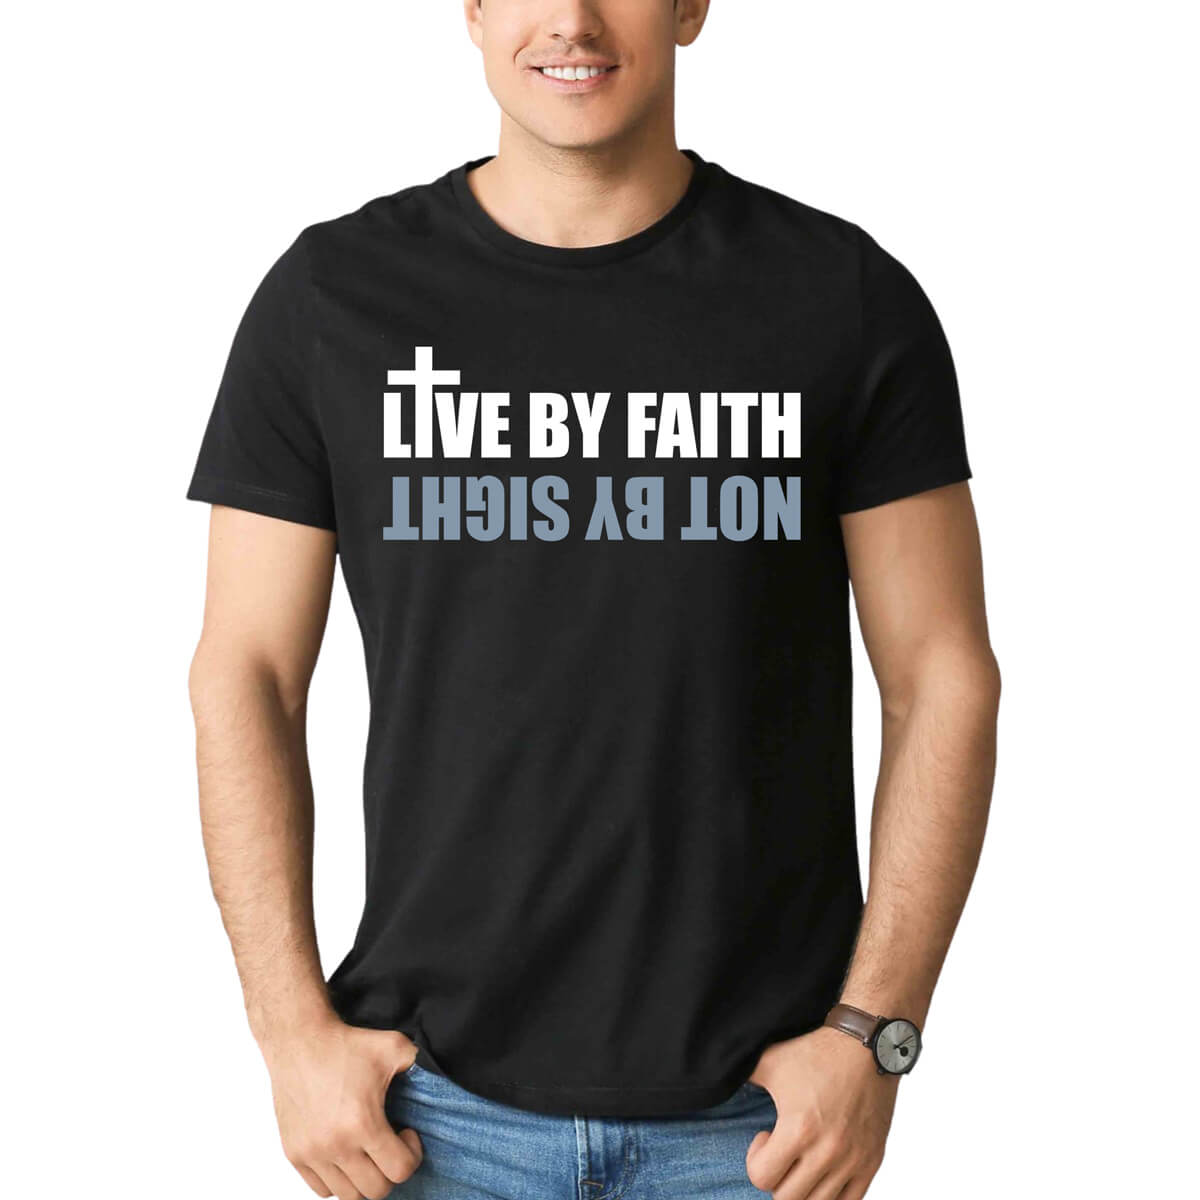 Live By Faith Not By Sight Men's T-Shirt